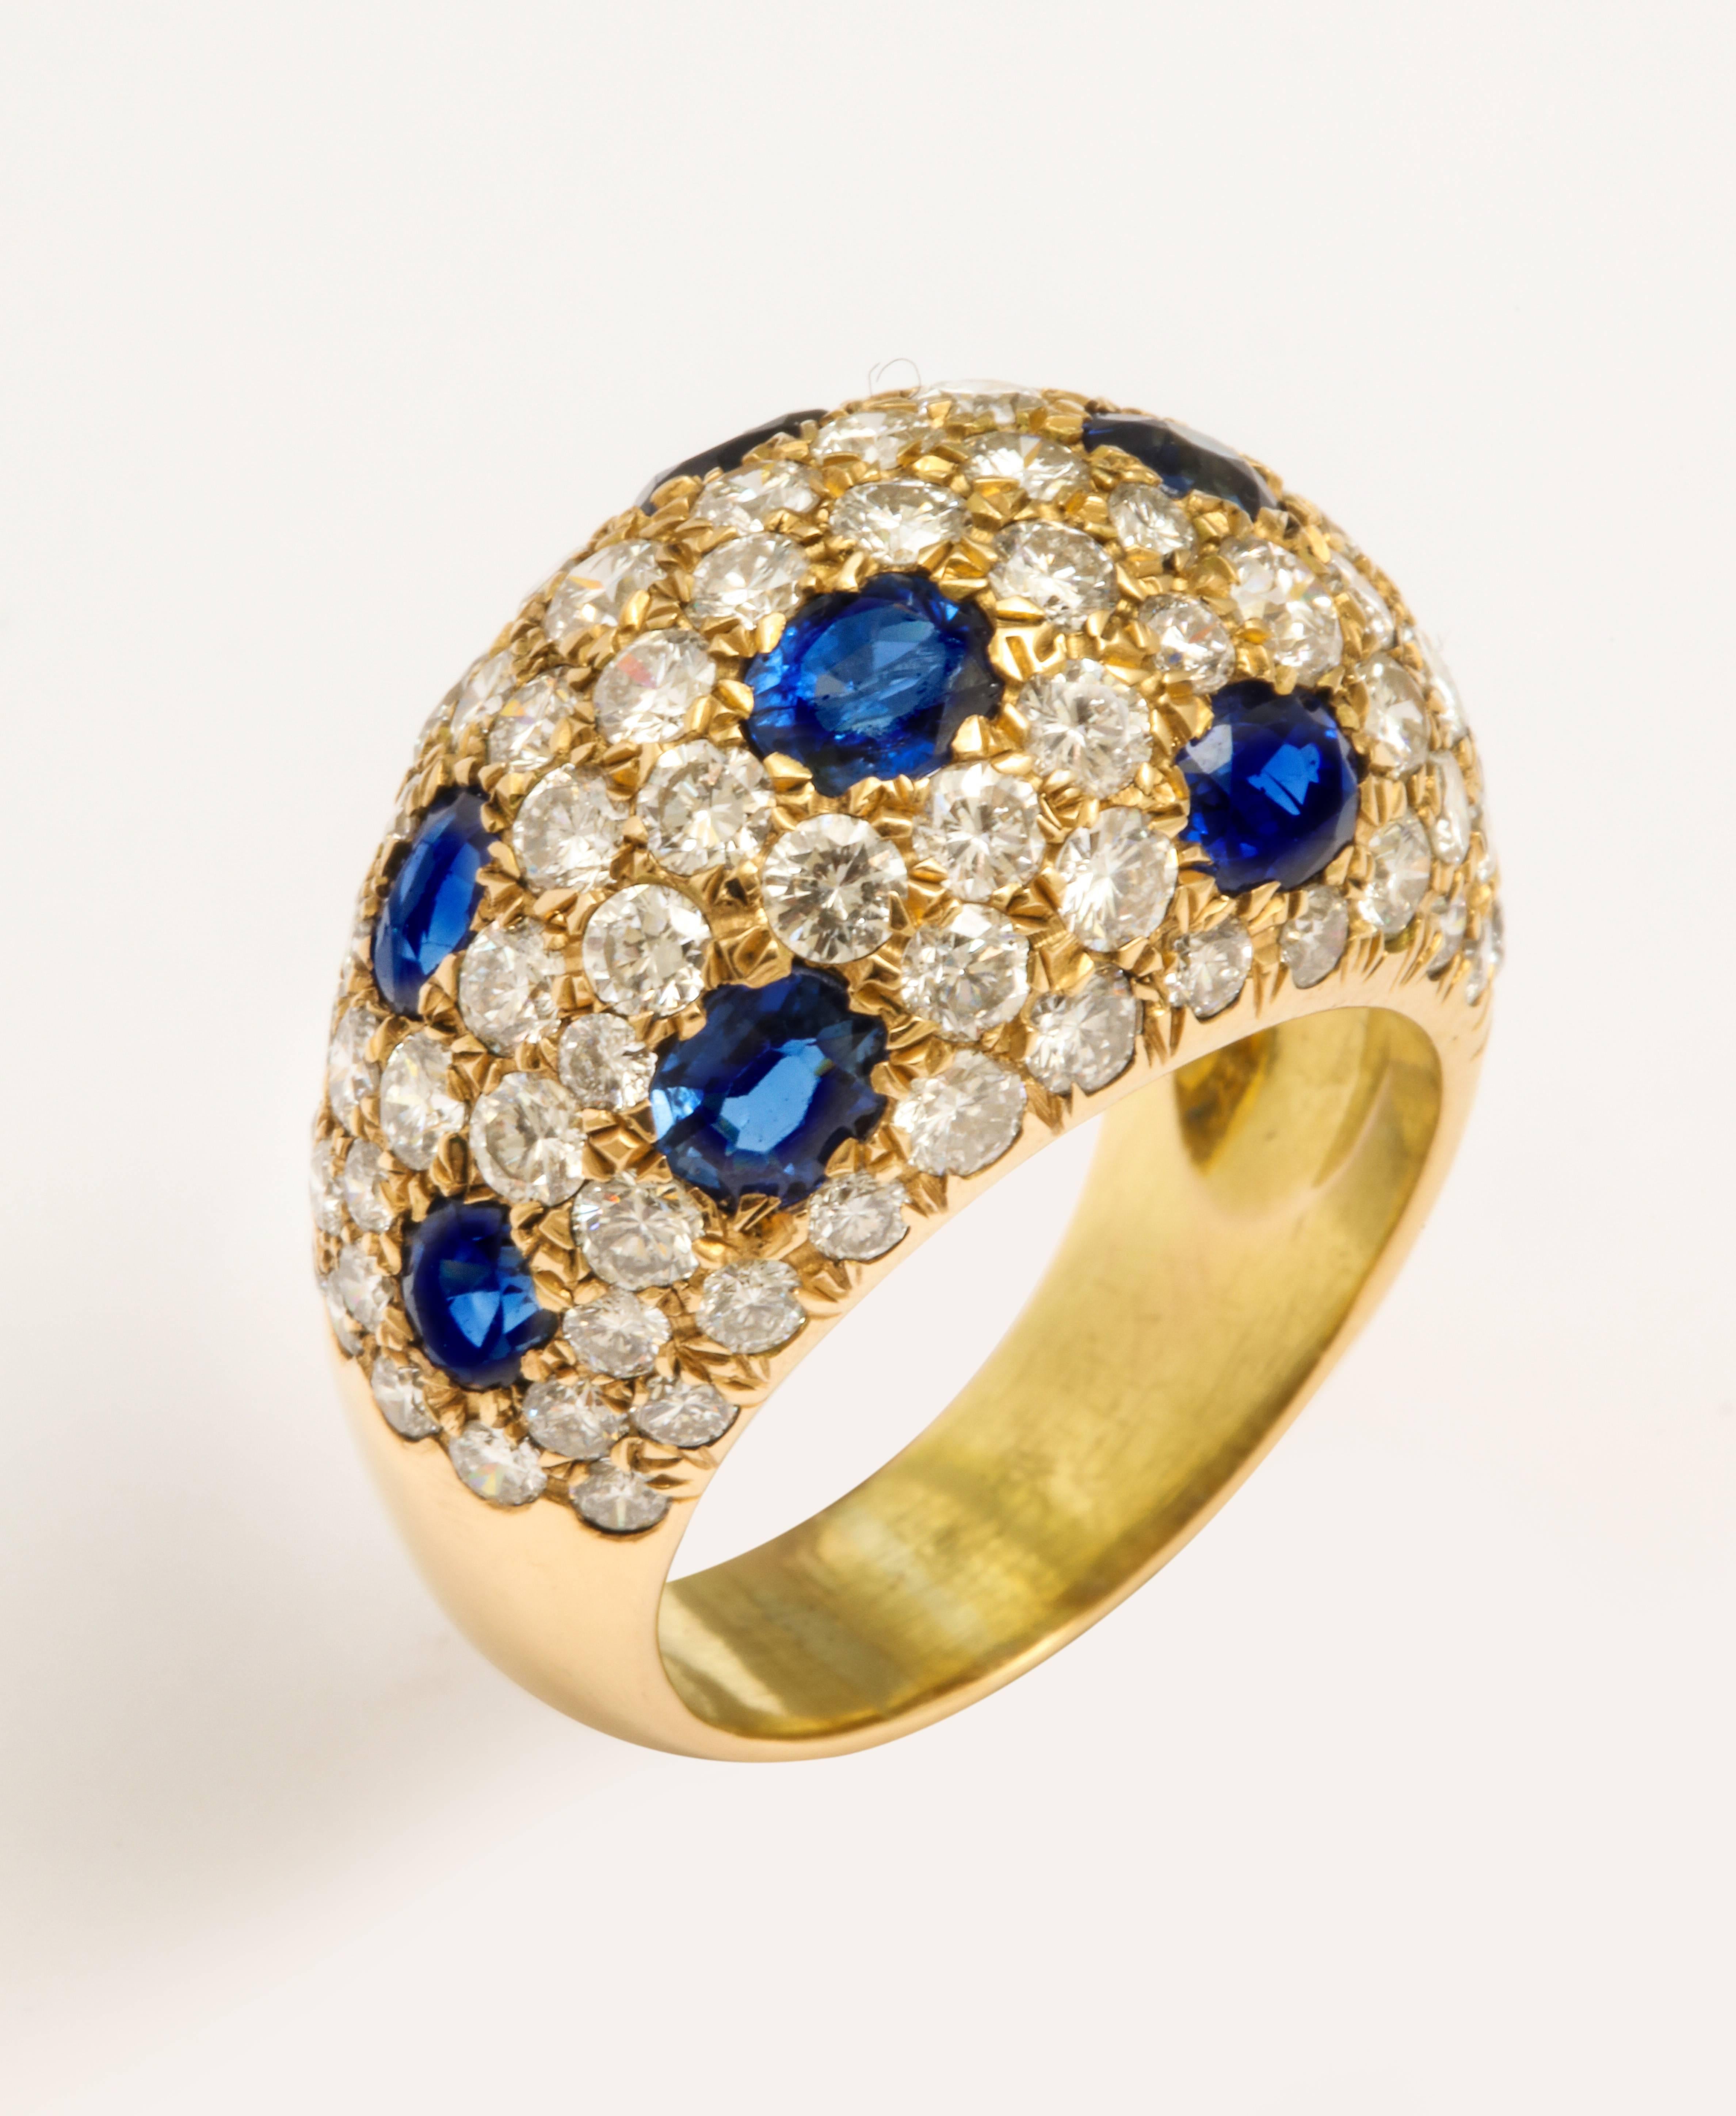 A super-stylish 18 karat yellow gold bombay ring pave set with round brilliant cut diamonds and oval sapphires. An estimated diamond weight of 4.00 carats and an estimated sapphire weight of 3.60 carats. Made in France with French marks. Circa